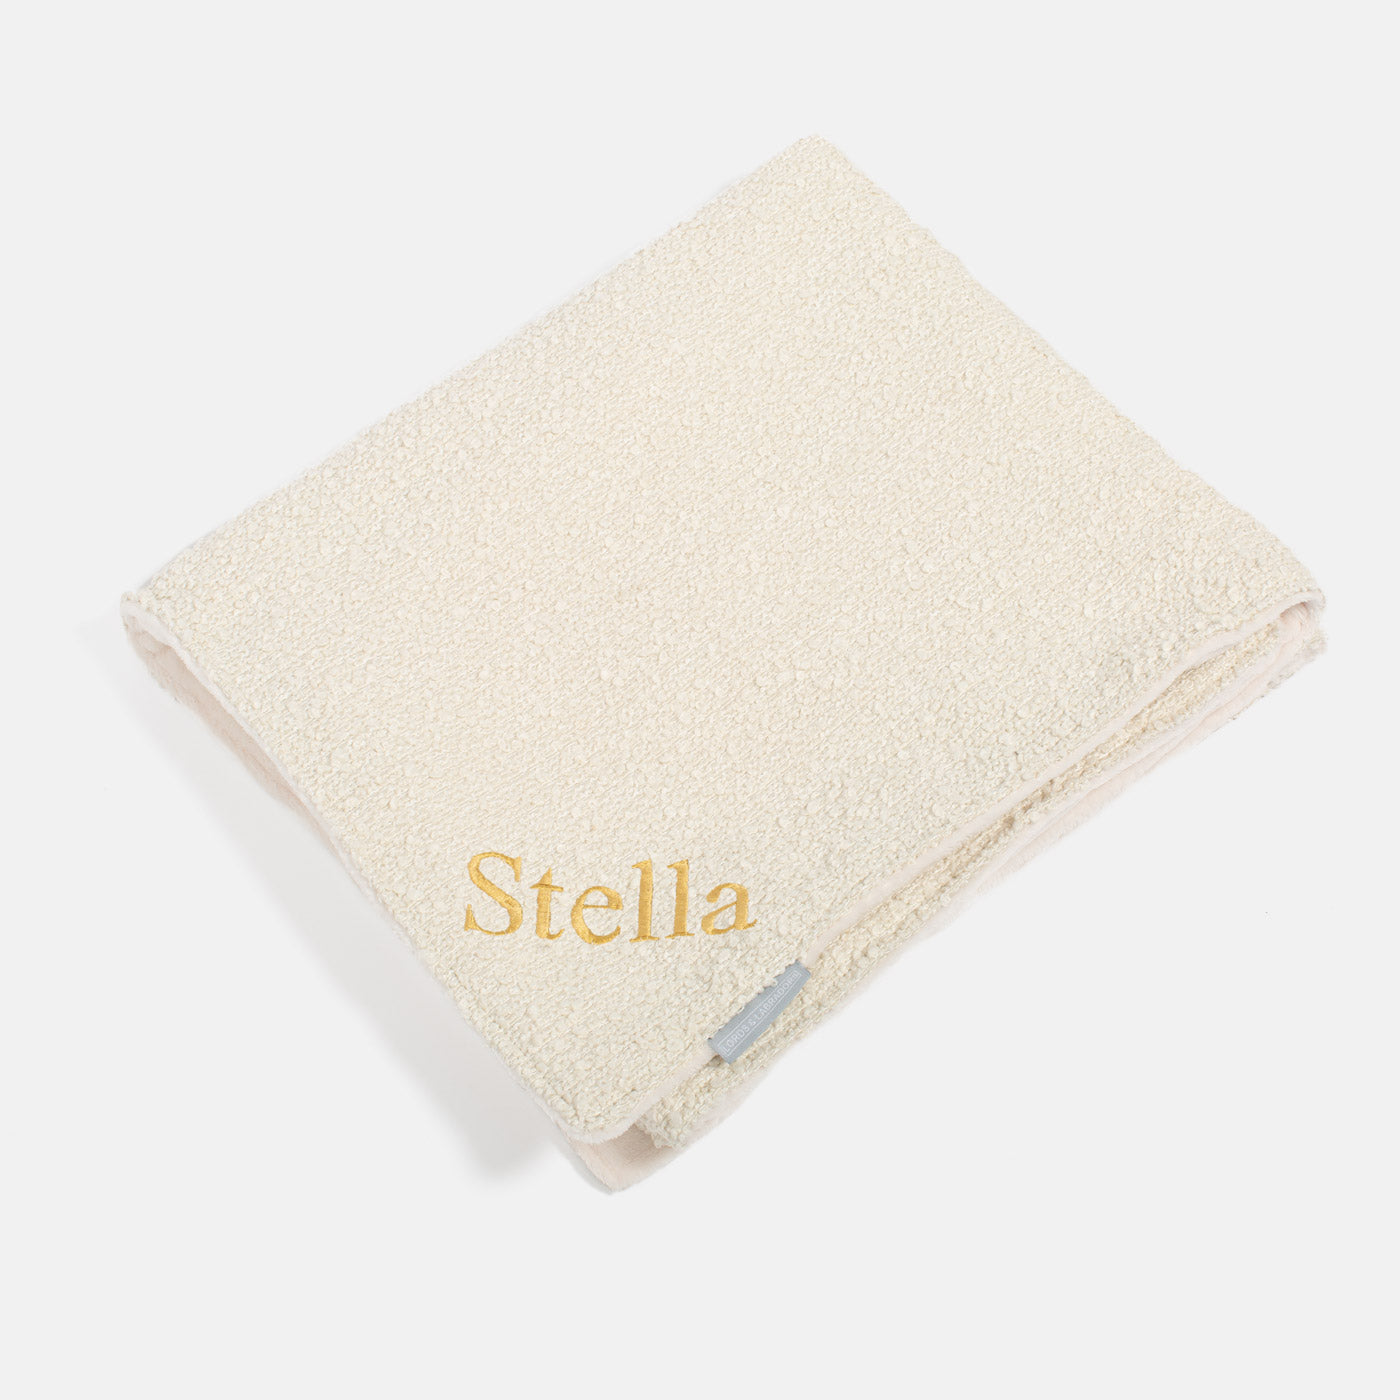  [colour:Ivory Boucle] Super Soft Sherpa & Teddy Fleece Lining, Our Luxury Cat & Kitten Blanket In Stunning Ivory Boucle I The Perfect Cat Bed Accessory! Available To Personalise at Lords & Labradors